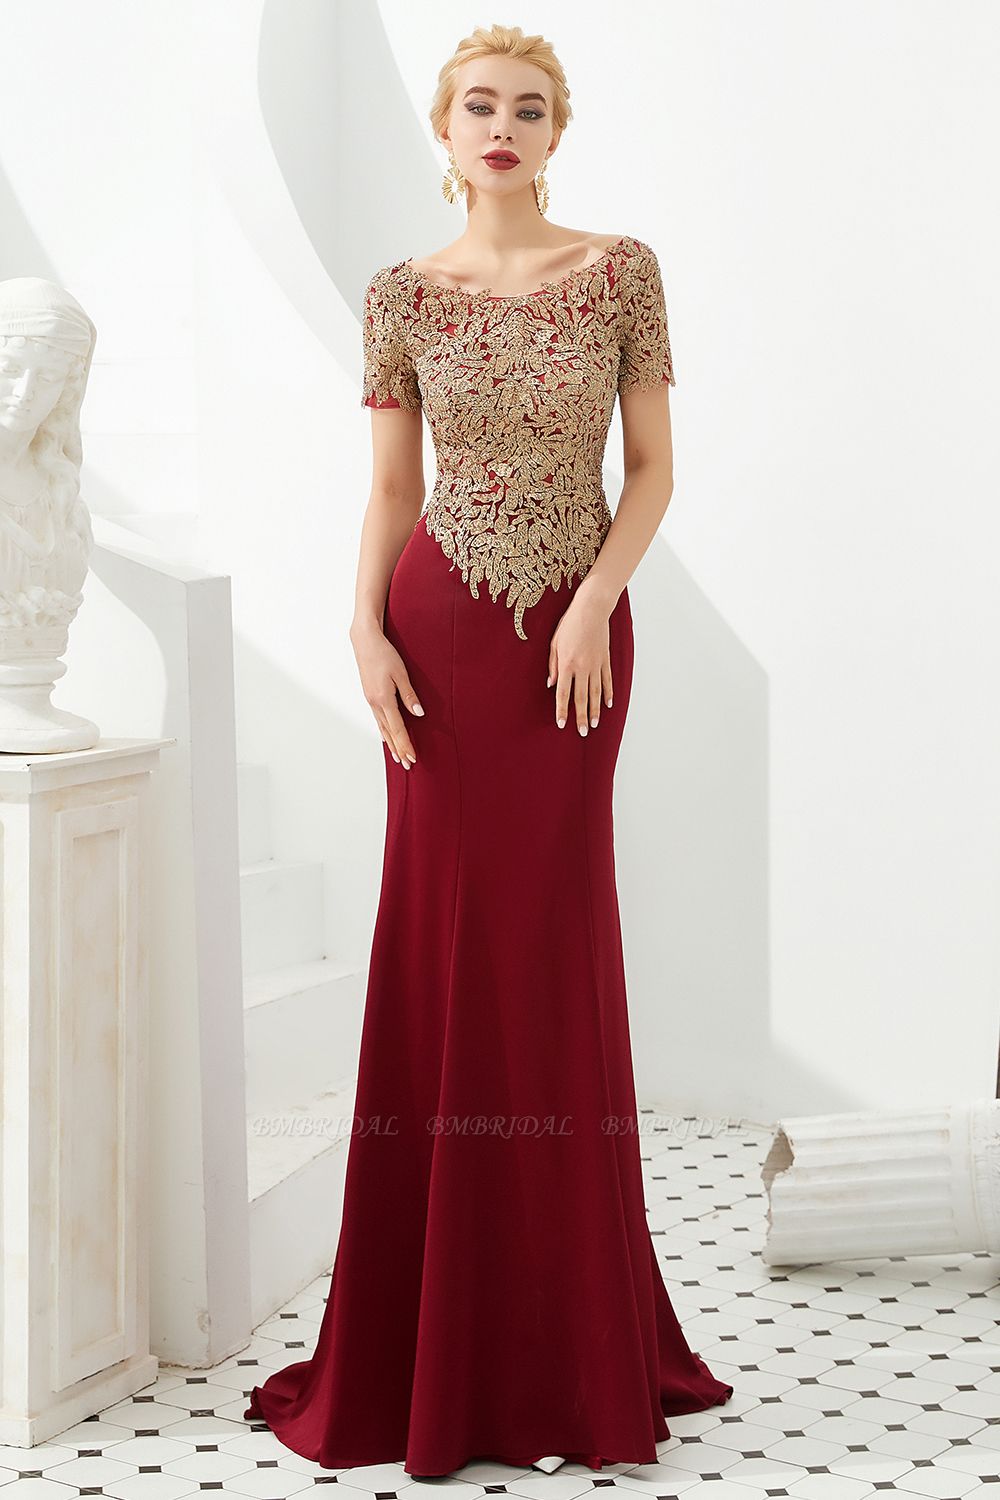 BMbridal Burgundy Short Sleeves Mermaid Prom Dress Long With Gold Appliques